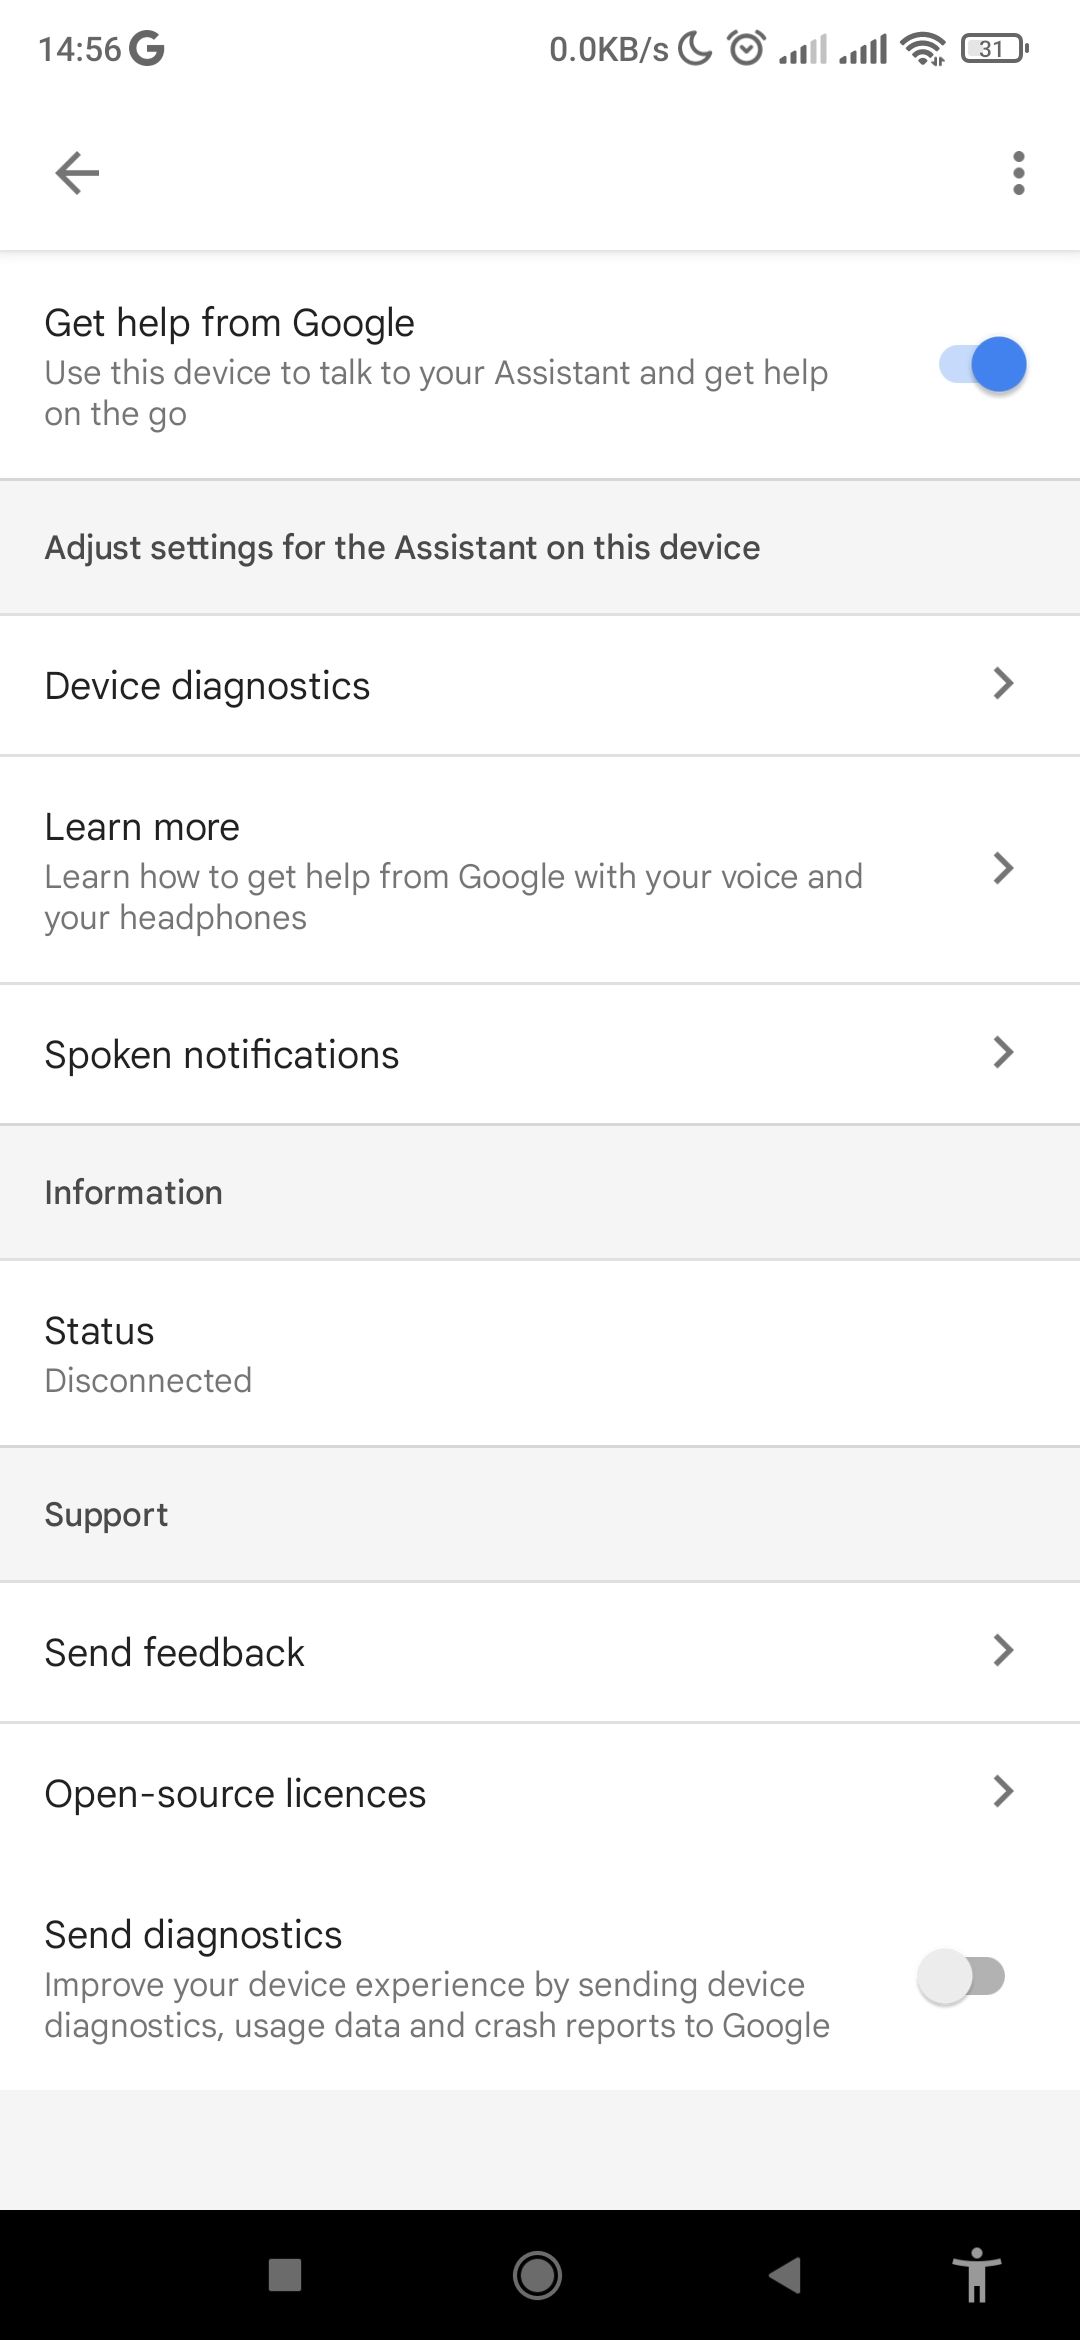 Setting up Google Assistant to work with wired headphones